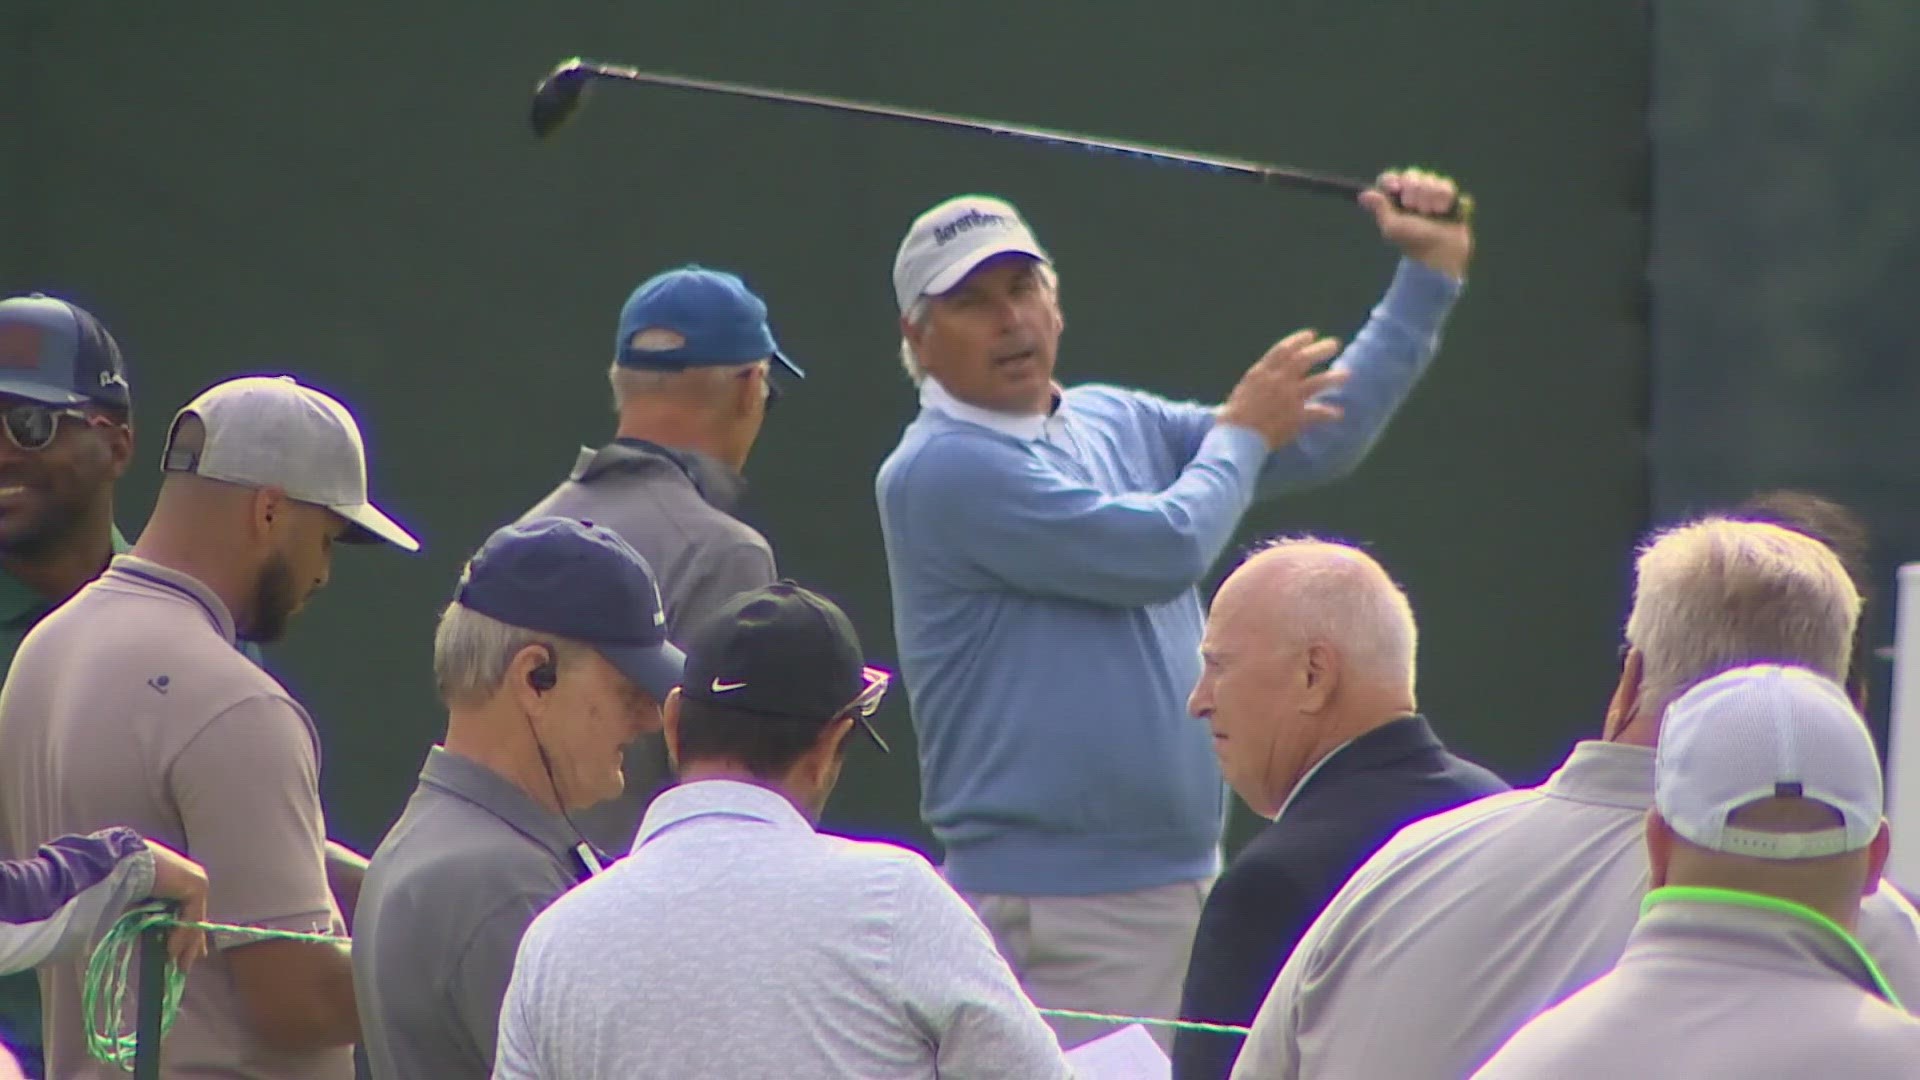 Couples teed off alongside four other Seattle sports legends in the Korean Air Pro-Am on Thursday.